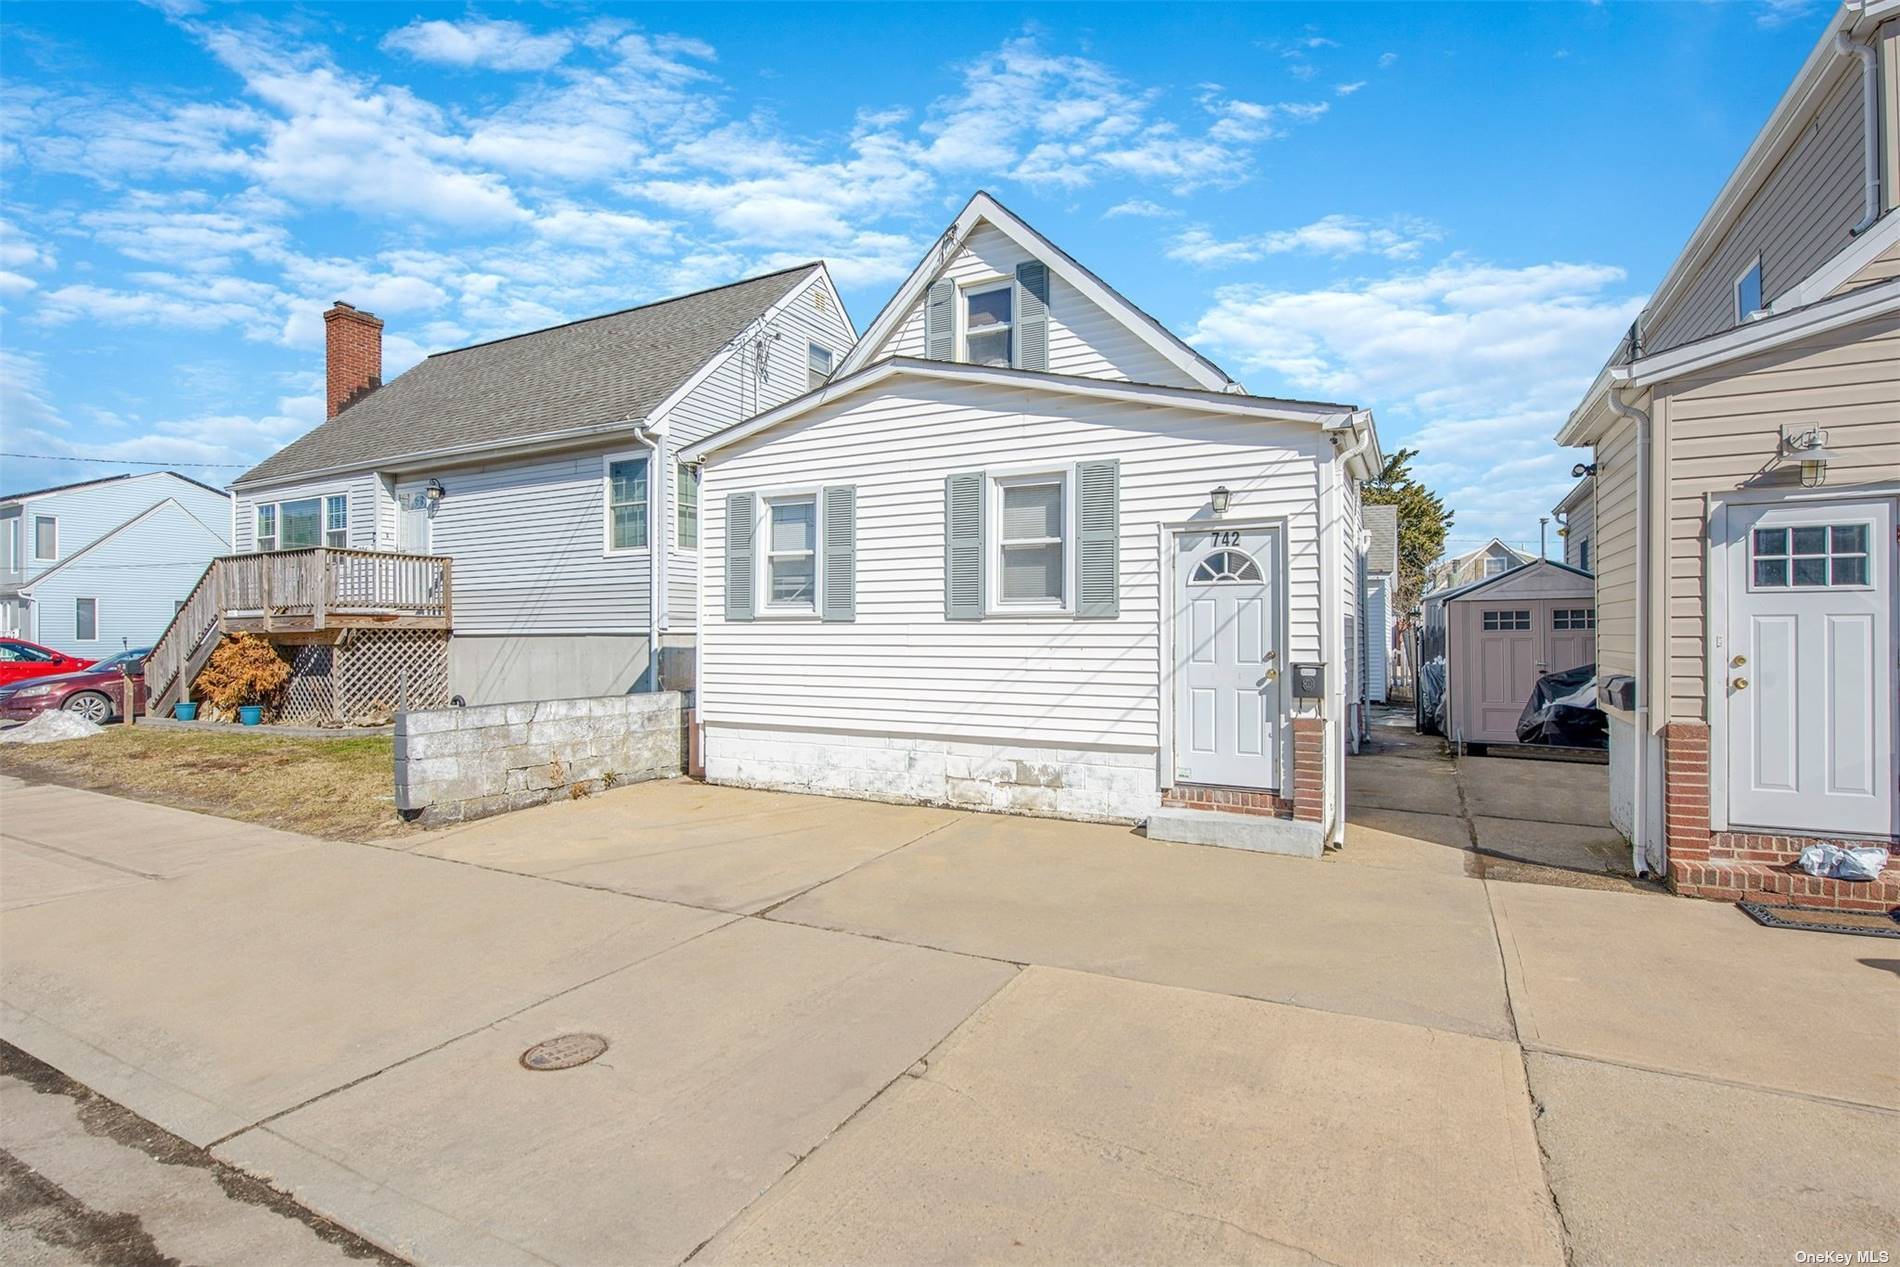 Discover waterfront living at its finest with this exceptional two family home, perfectly situated minutes from the Great South Bay and all that Lindenhurst has to offer.